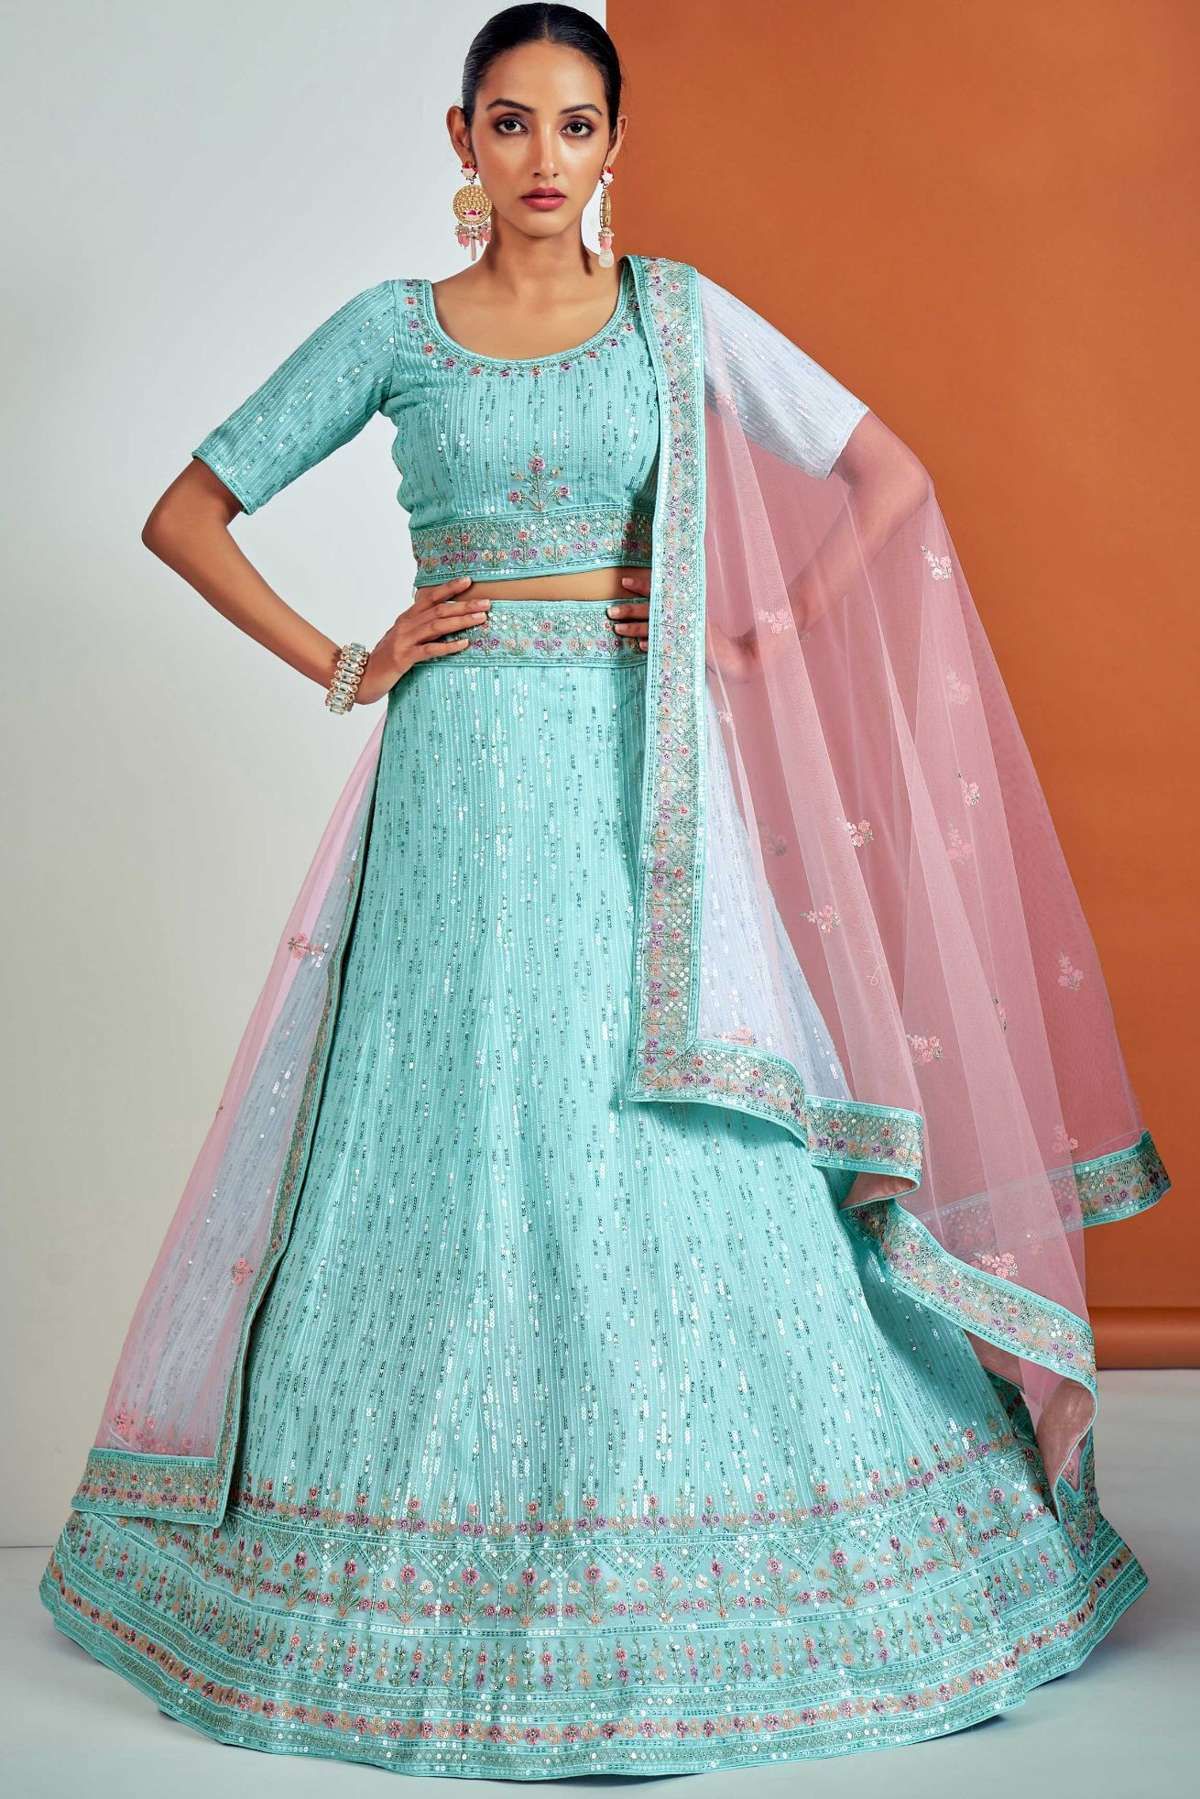 Georgette Thread Work Lehenga Choli In Turquoise Colour In Turquoise Colour LD05643398 A